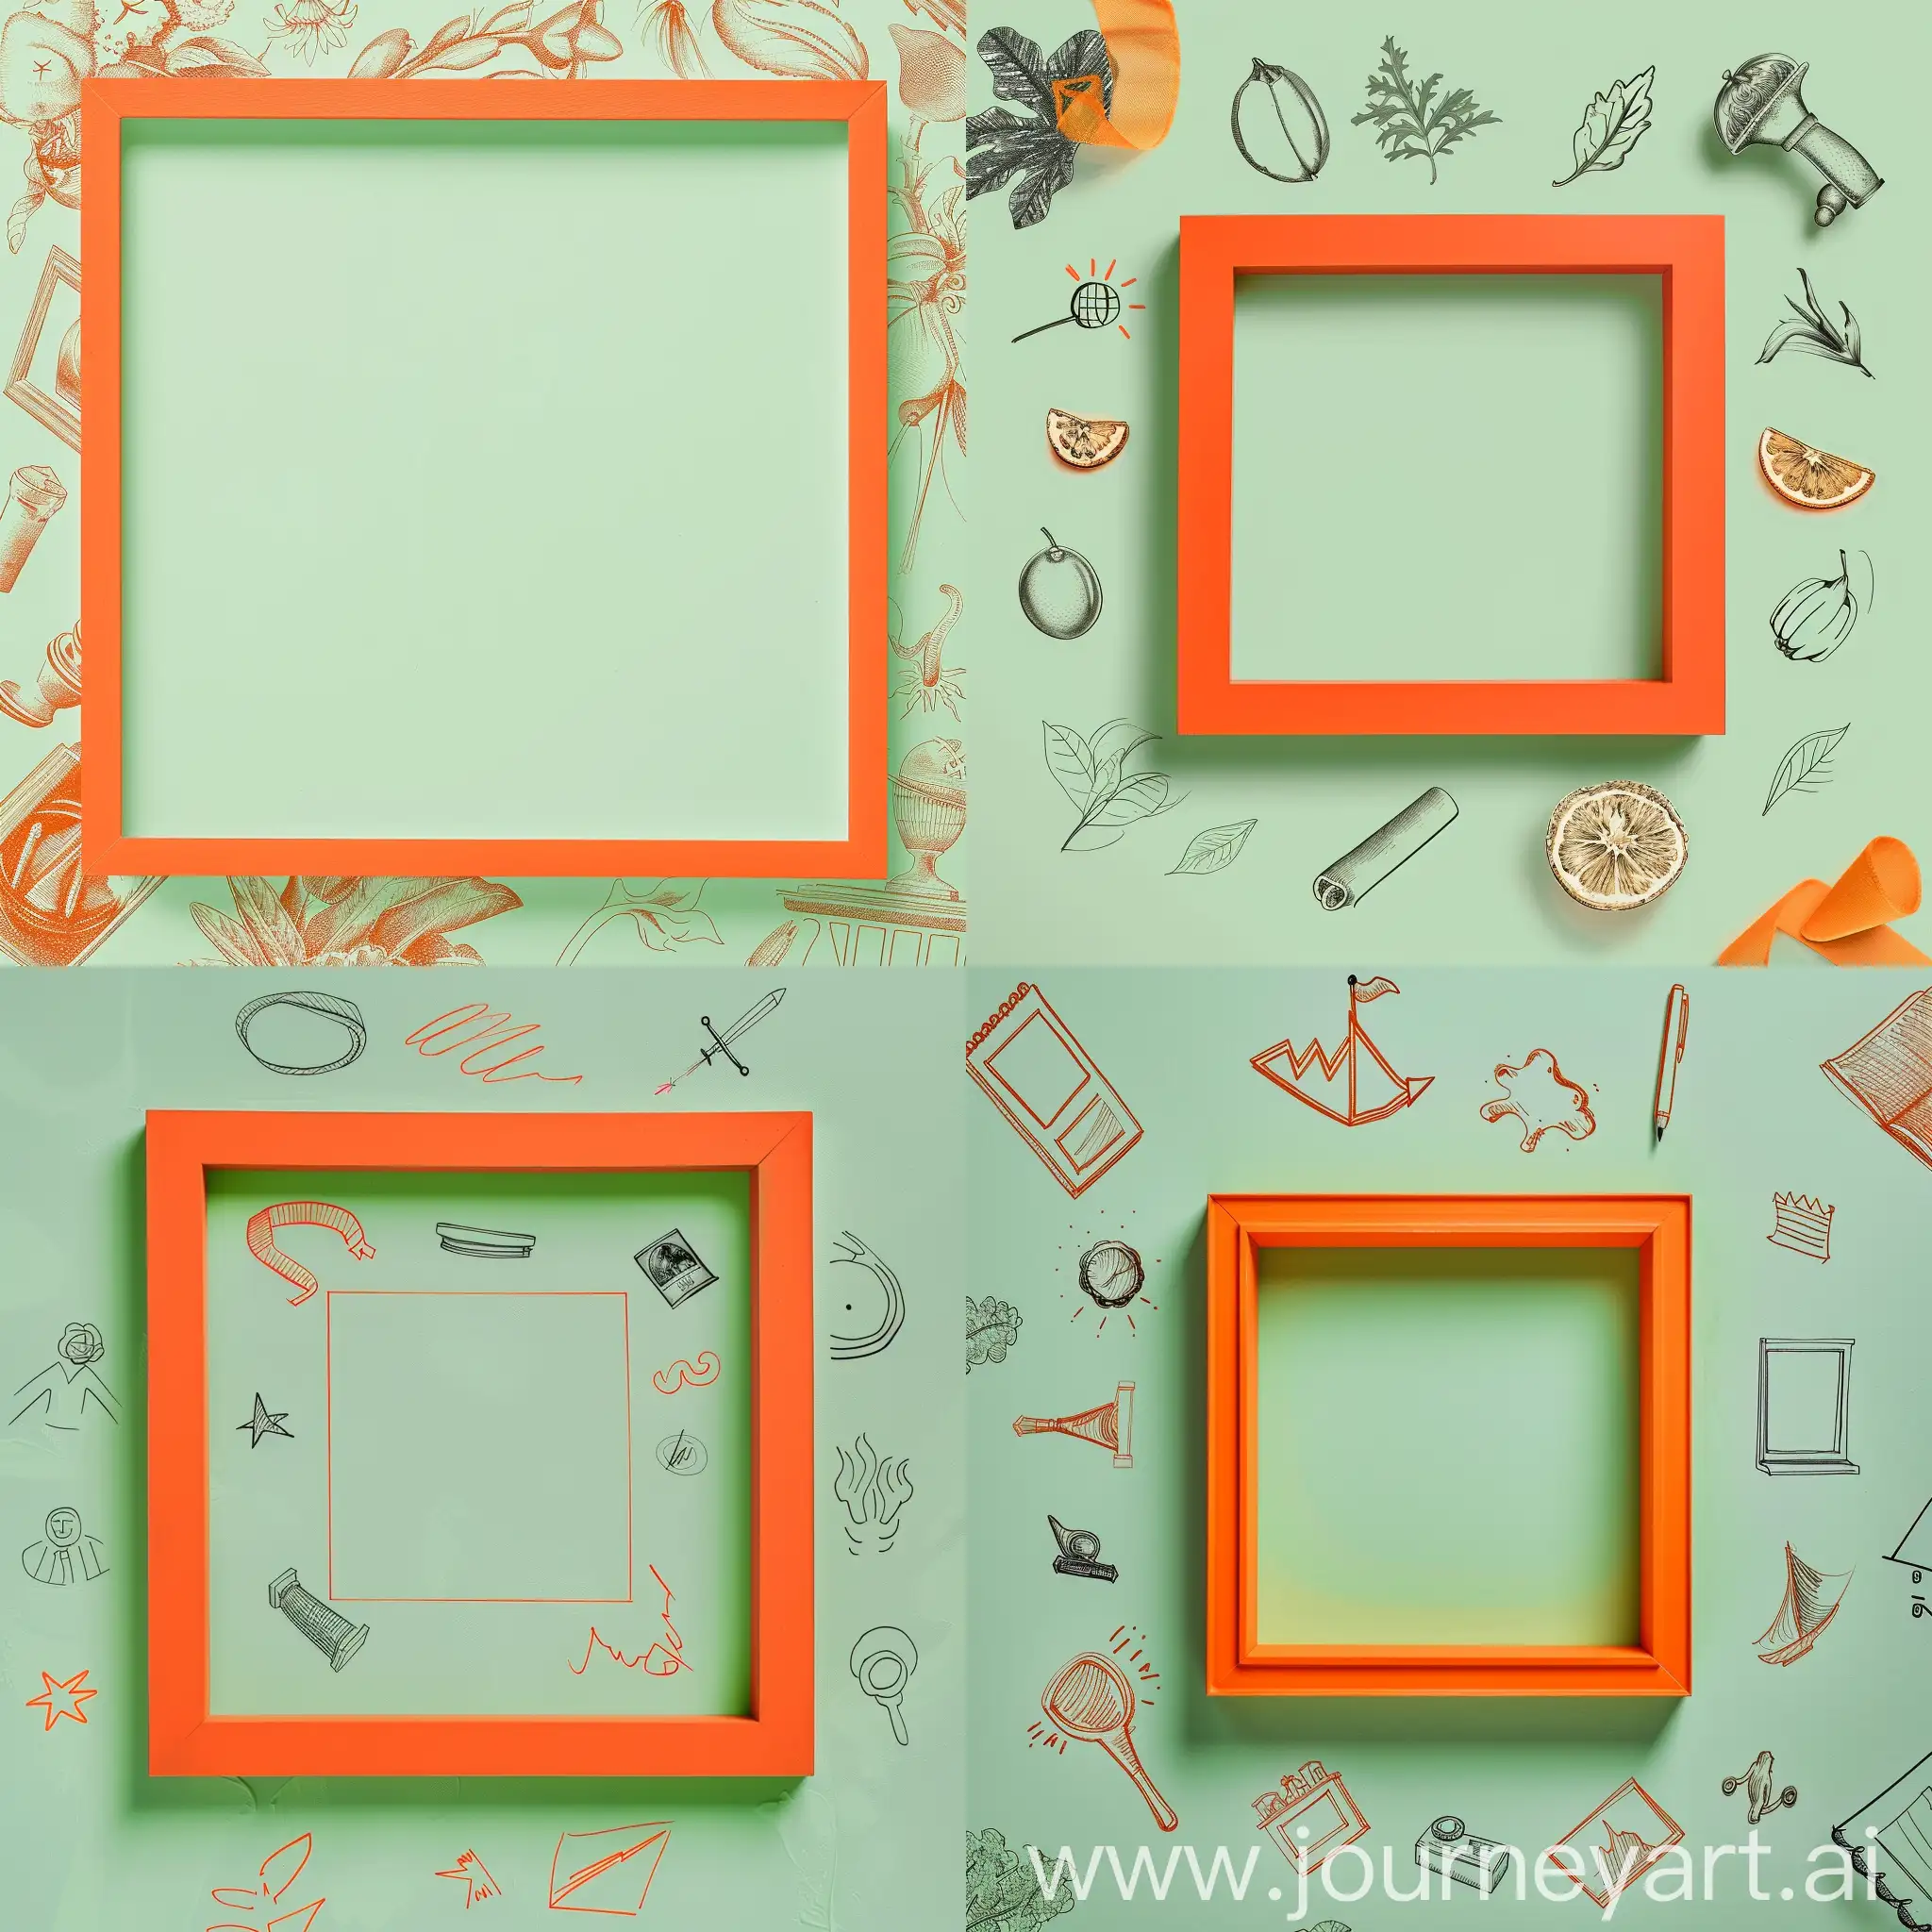 Bright-Orange-Square-Frame-with-Political-Elements-on-Light-Green-Background